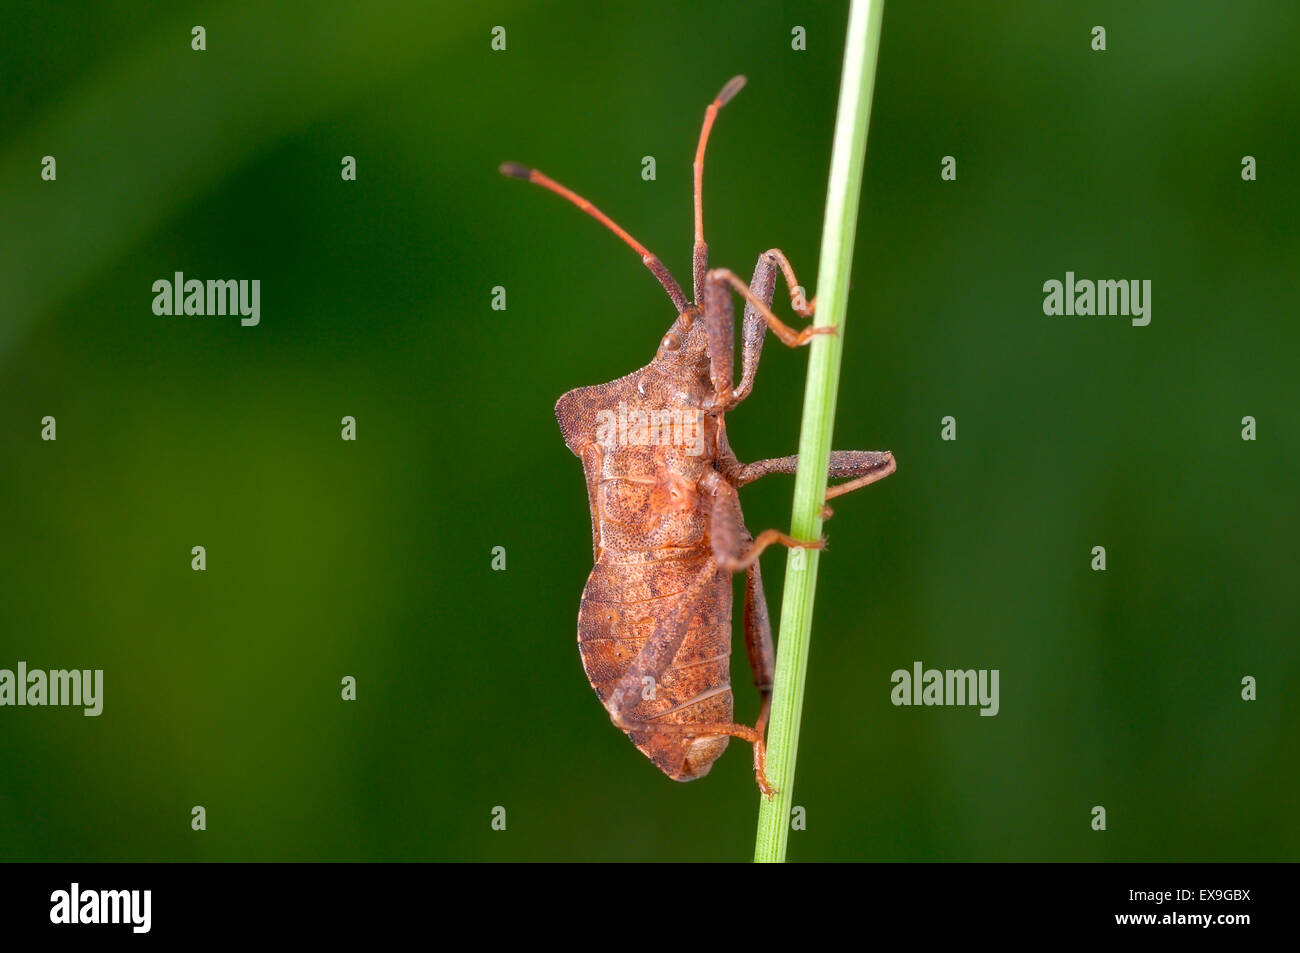 Brown beetle on a green stem. Blurred natural background, close-up Stock Photo